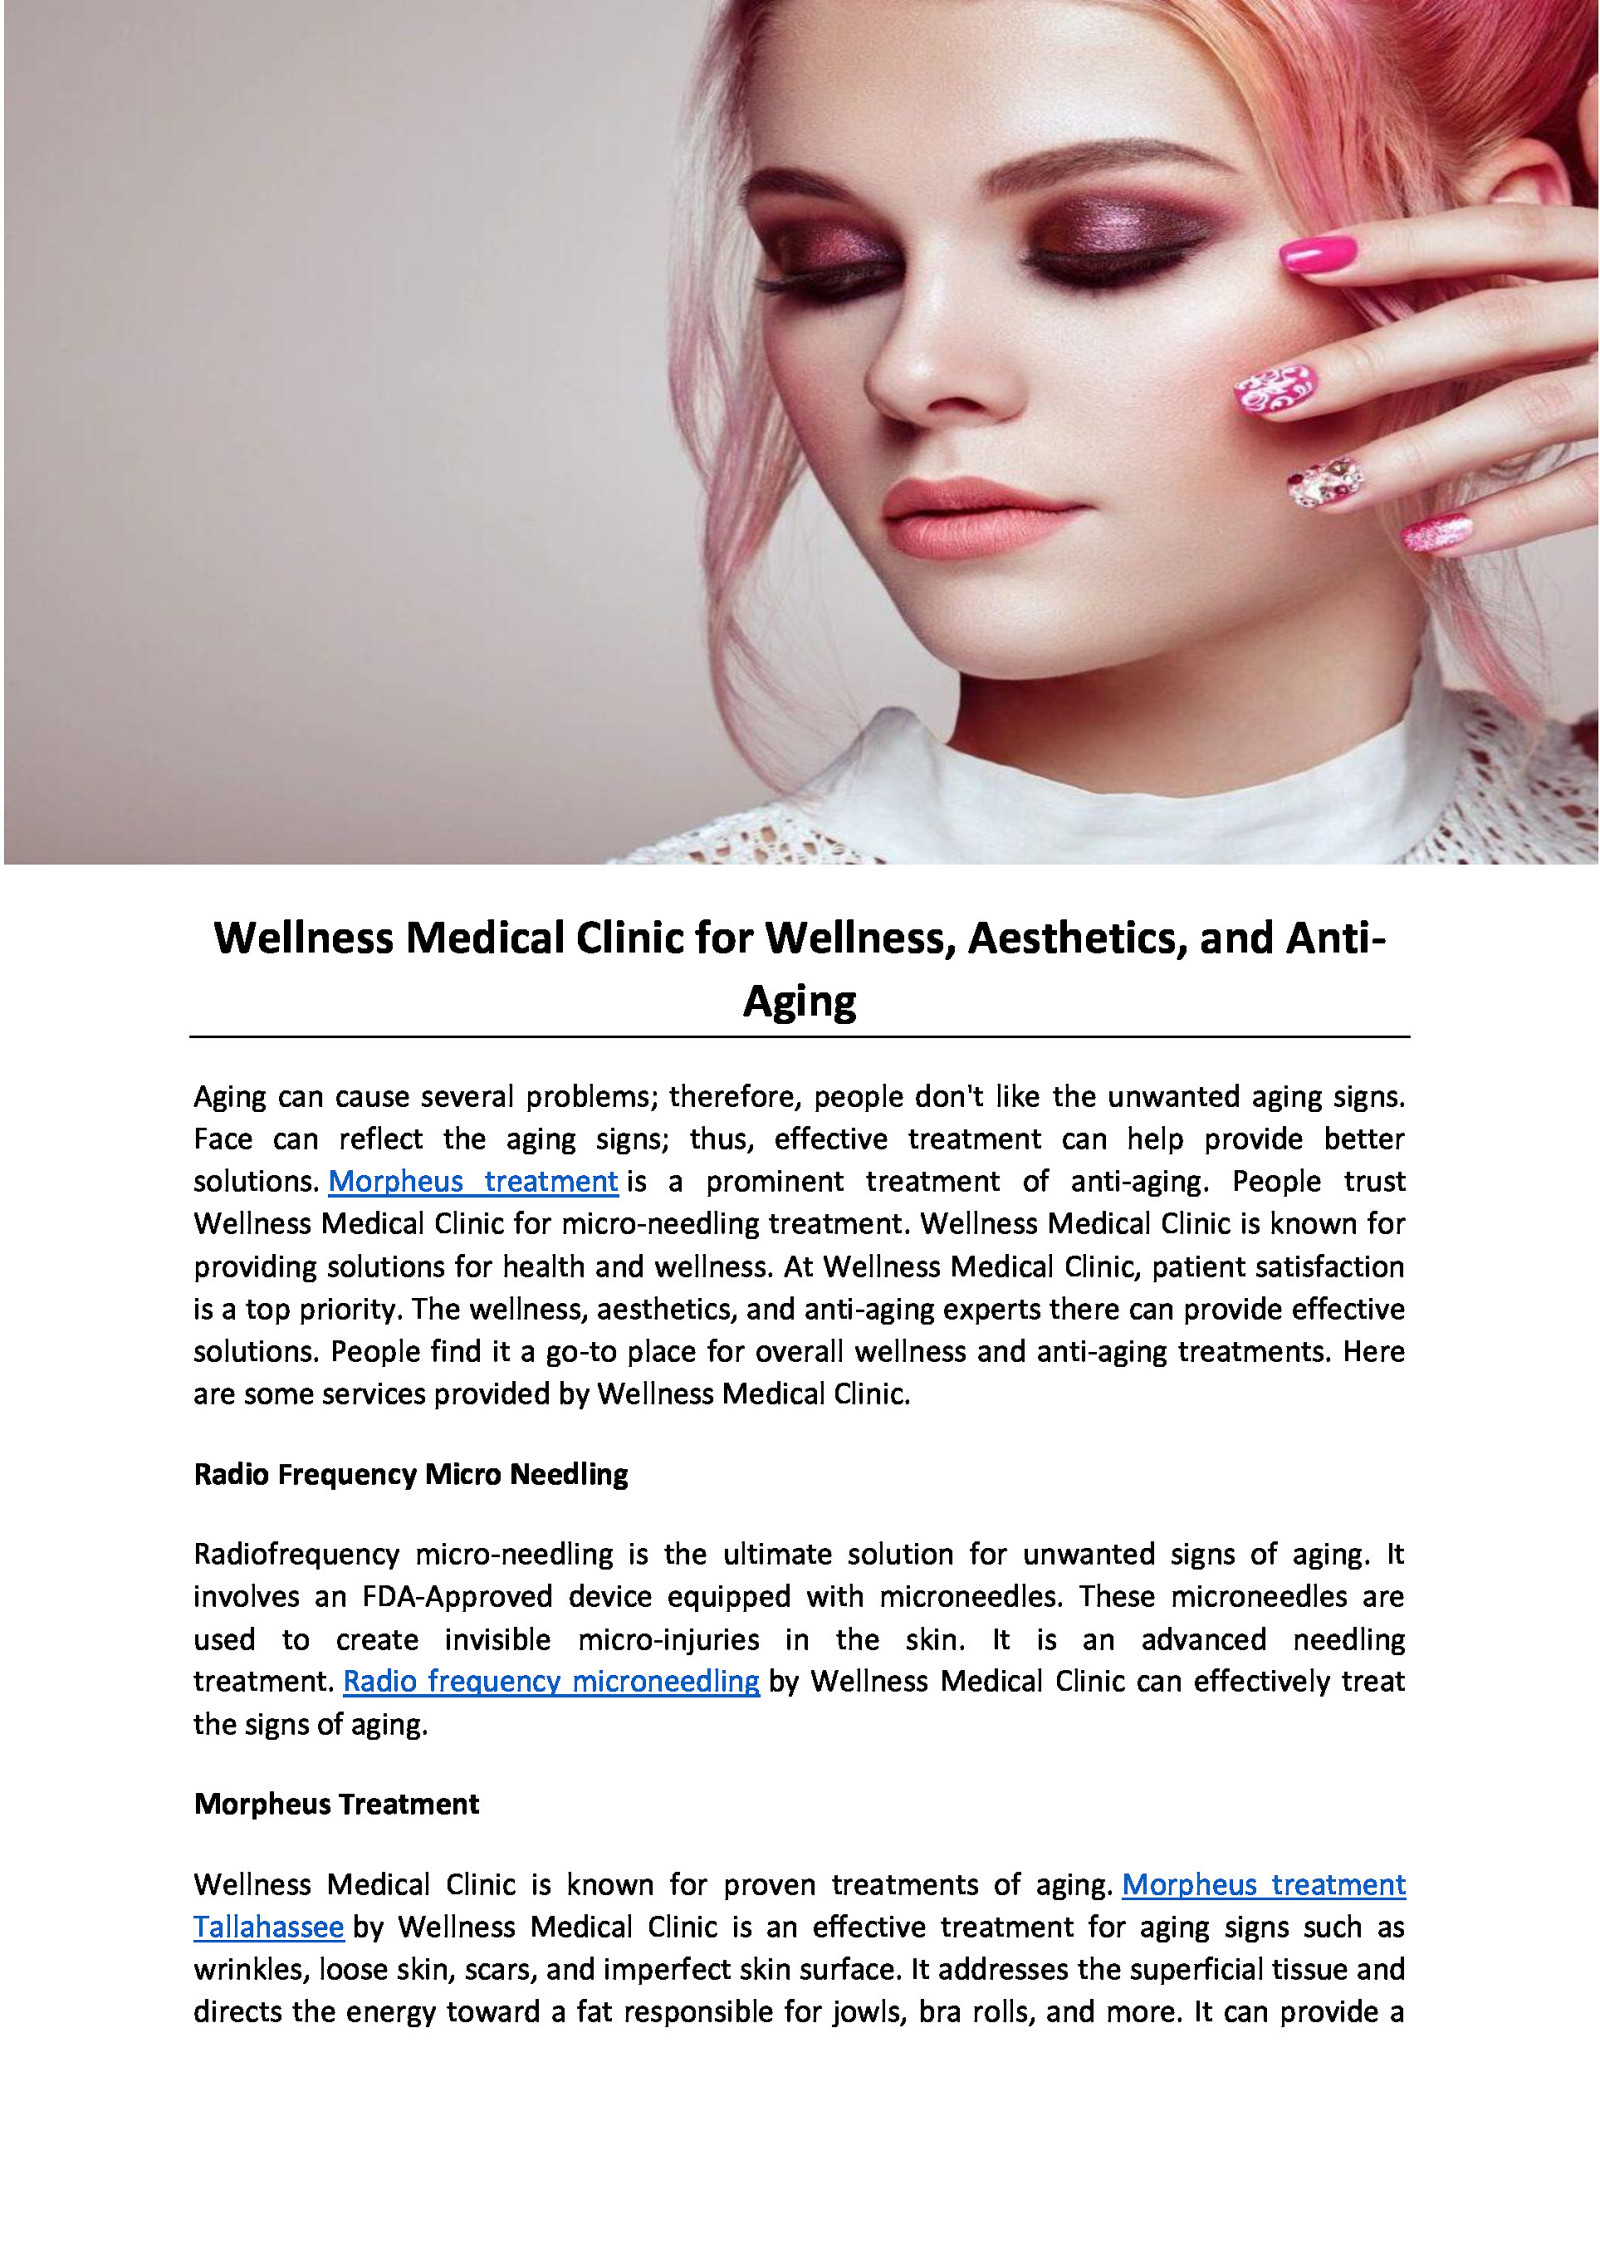 Wellness Medical Clinic for Wellness, Aesthetics, and Anti-Aging